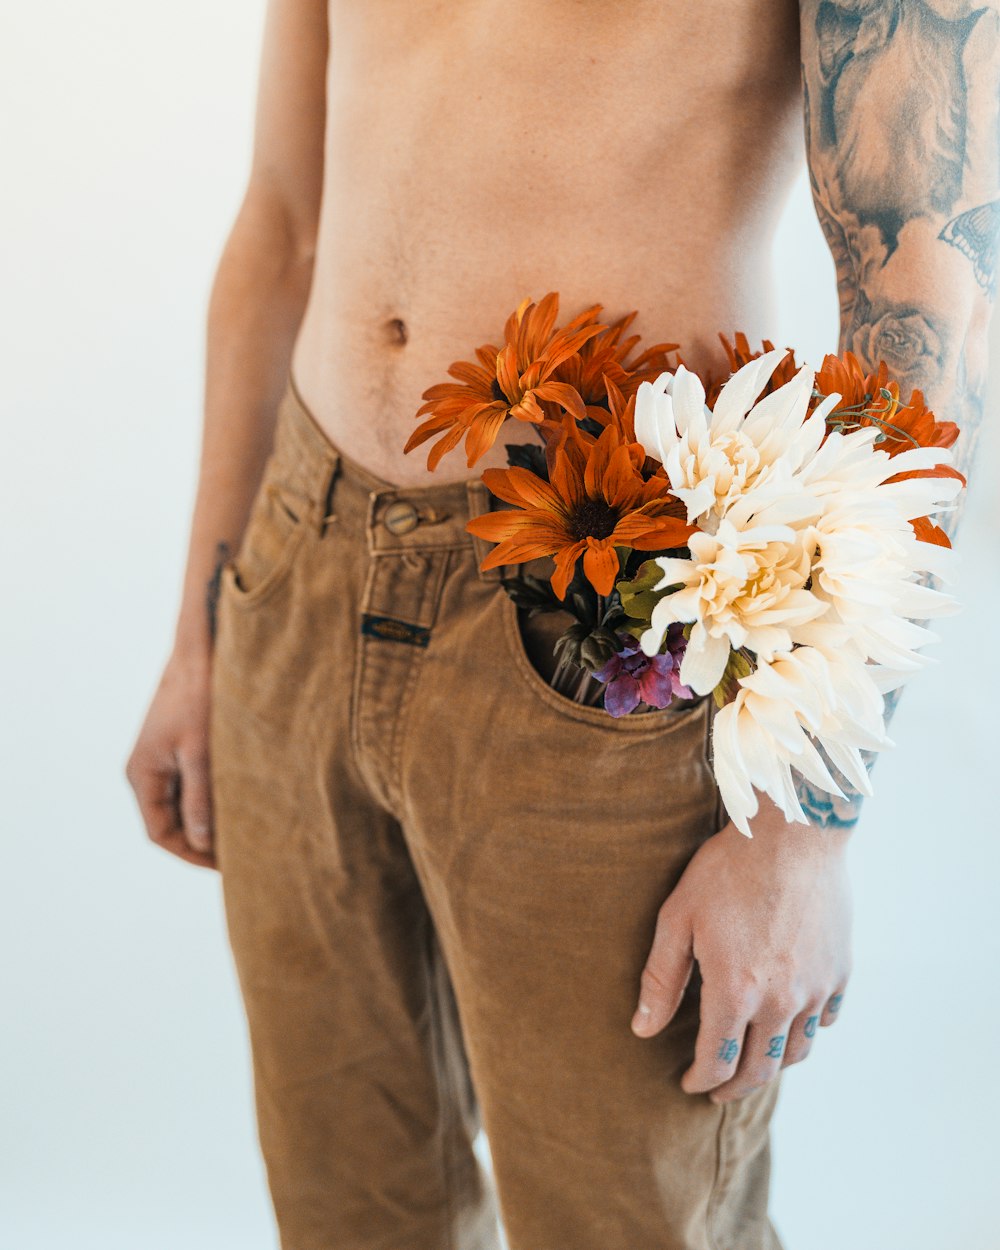 a man with a tattoo holding a bouquet of flowers in his pocket